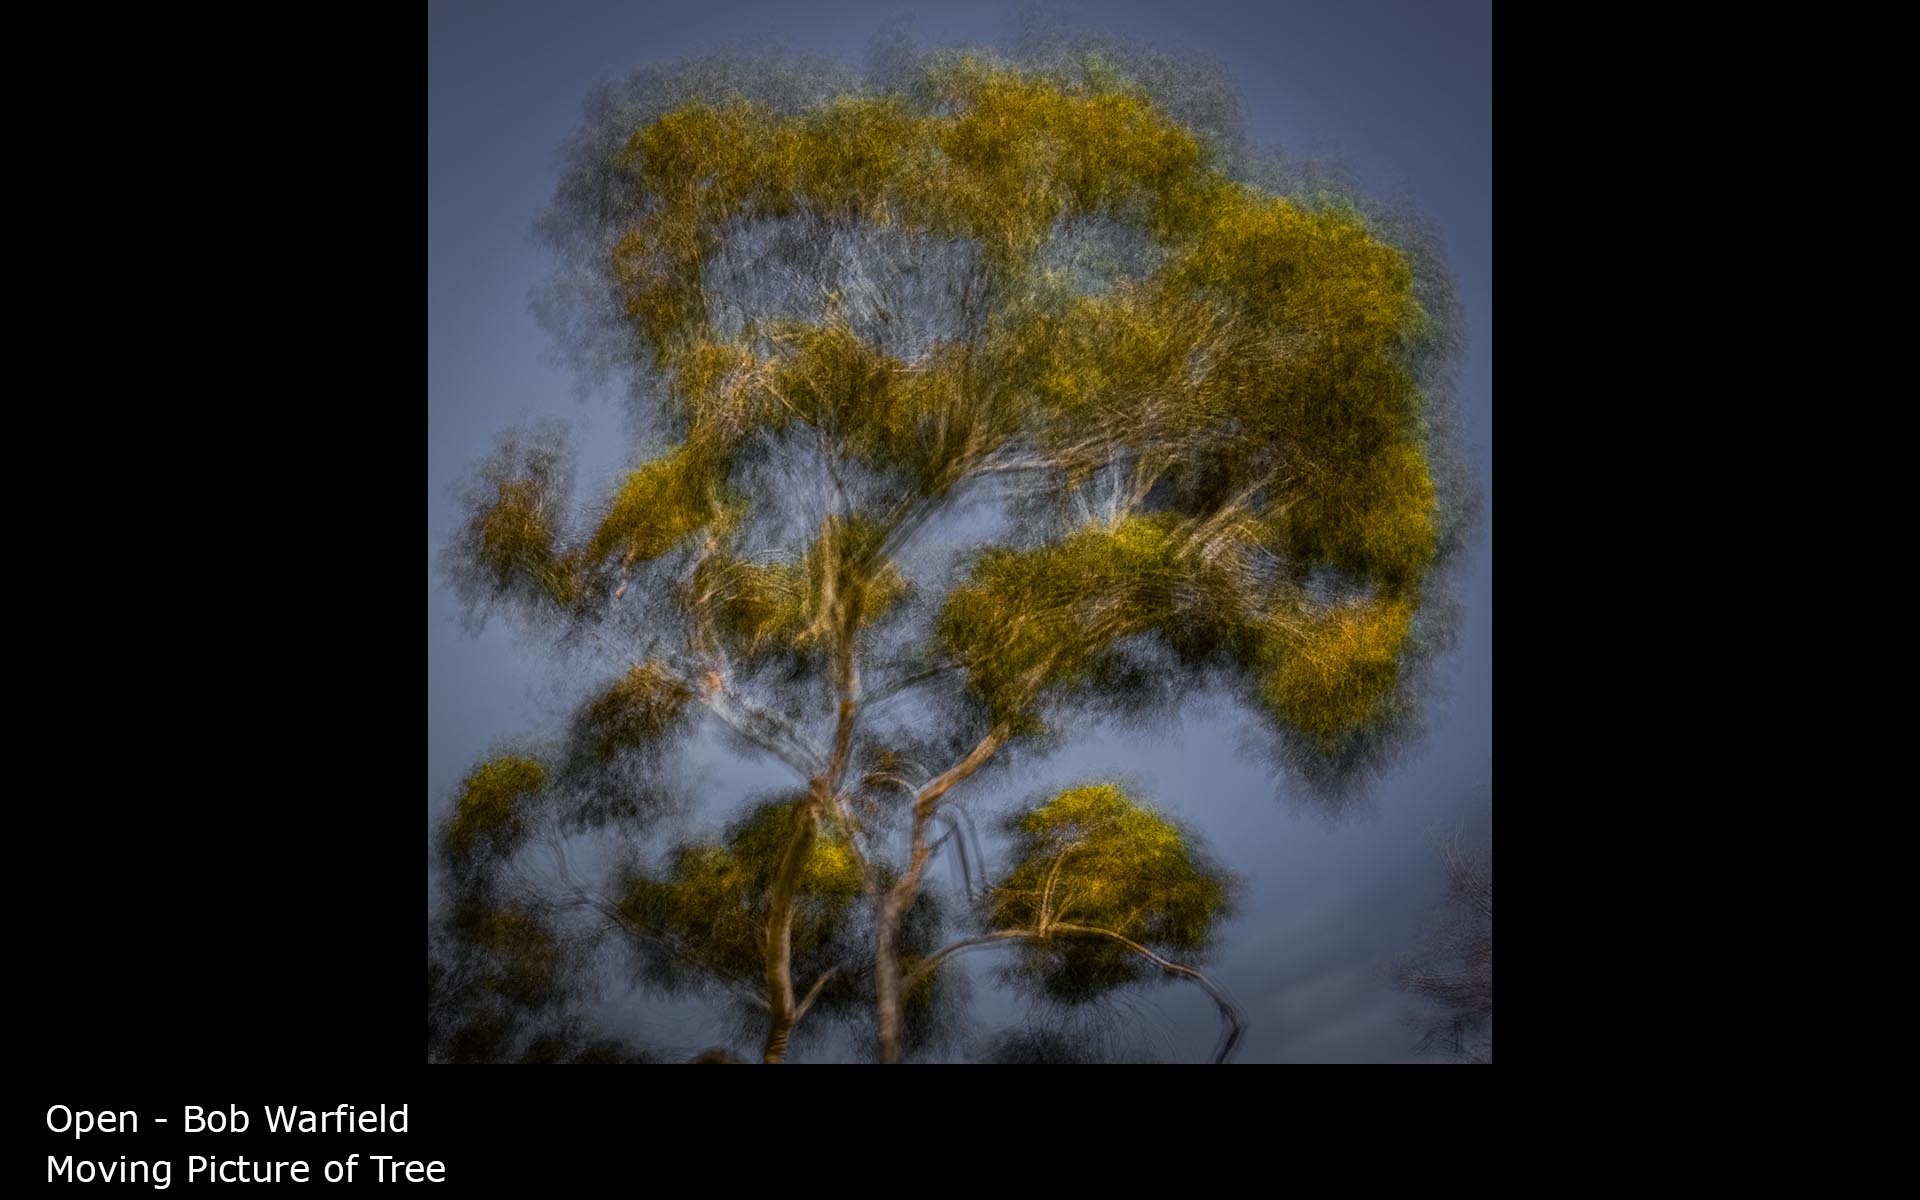 Moving Picture of Tree - Bob Warfield